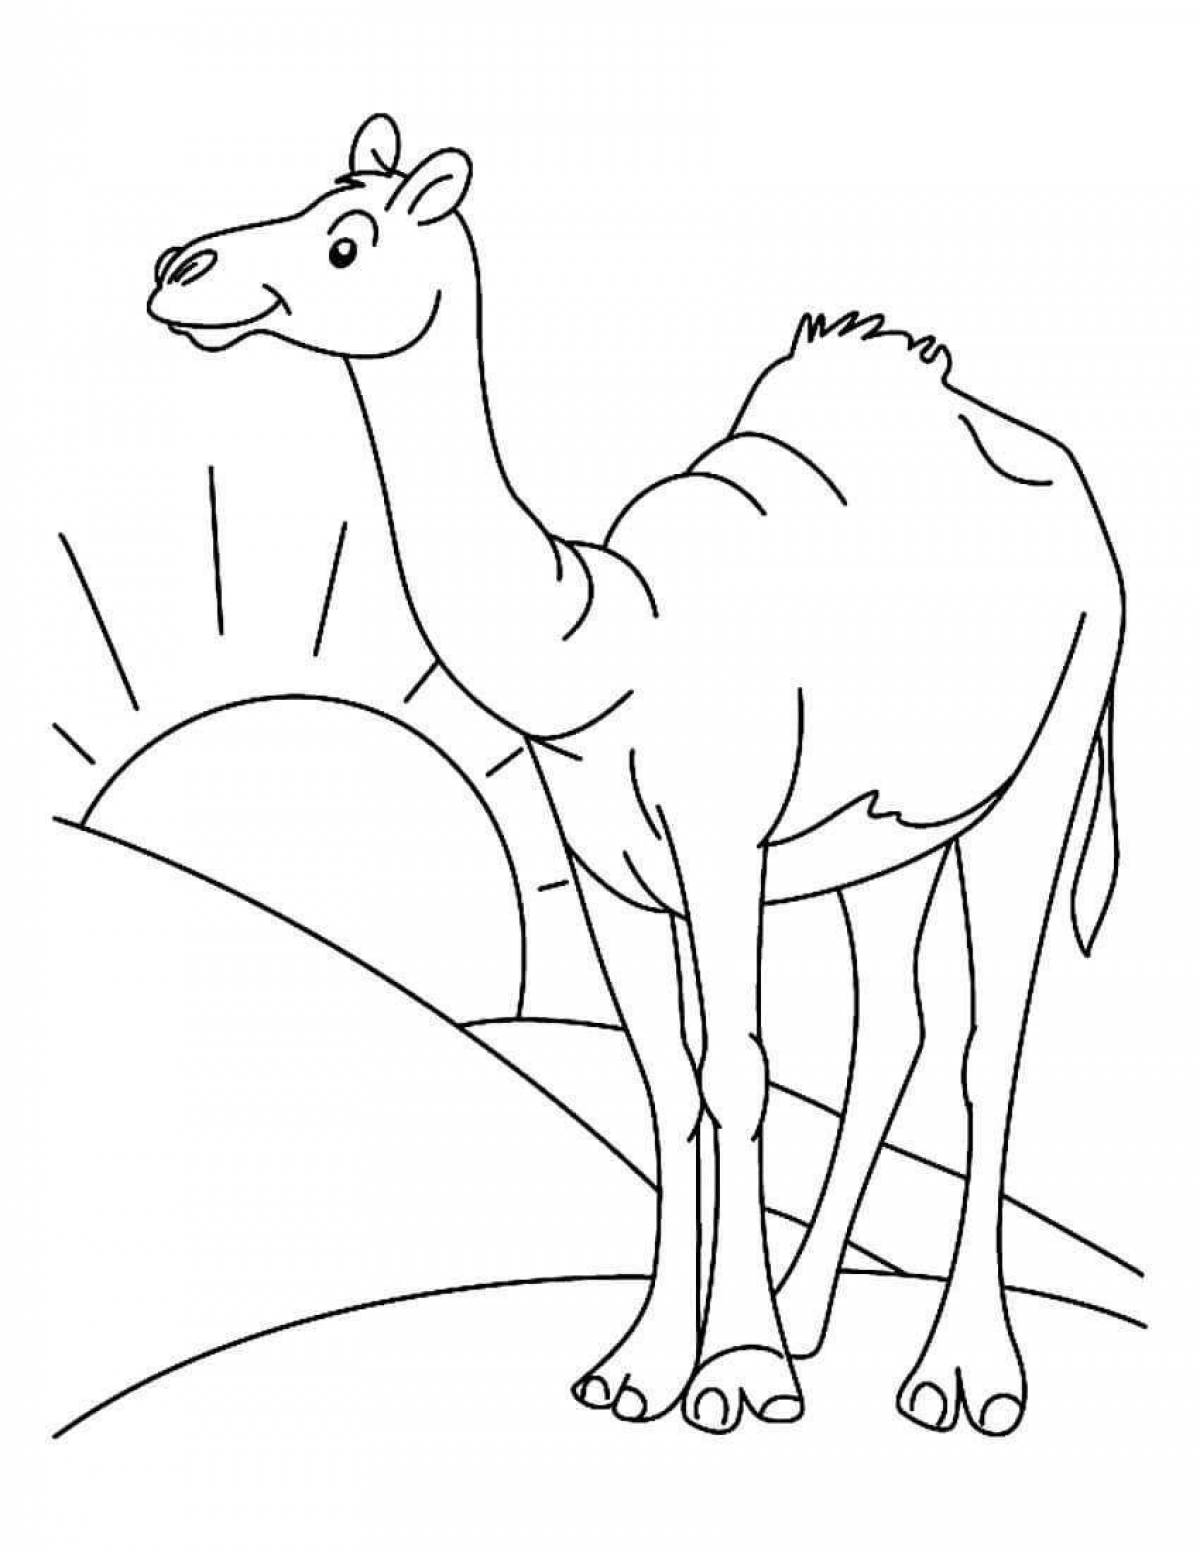 Exquisite camel coloring book for kids